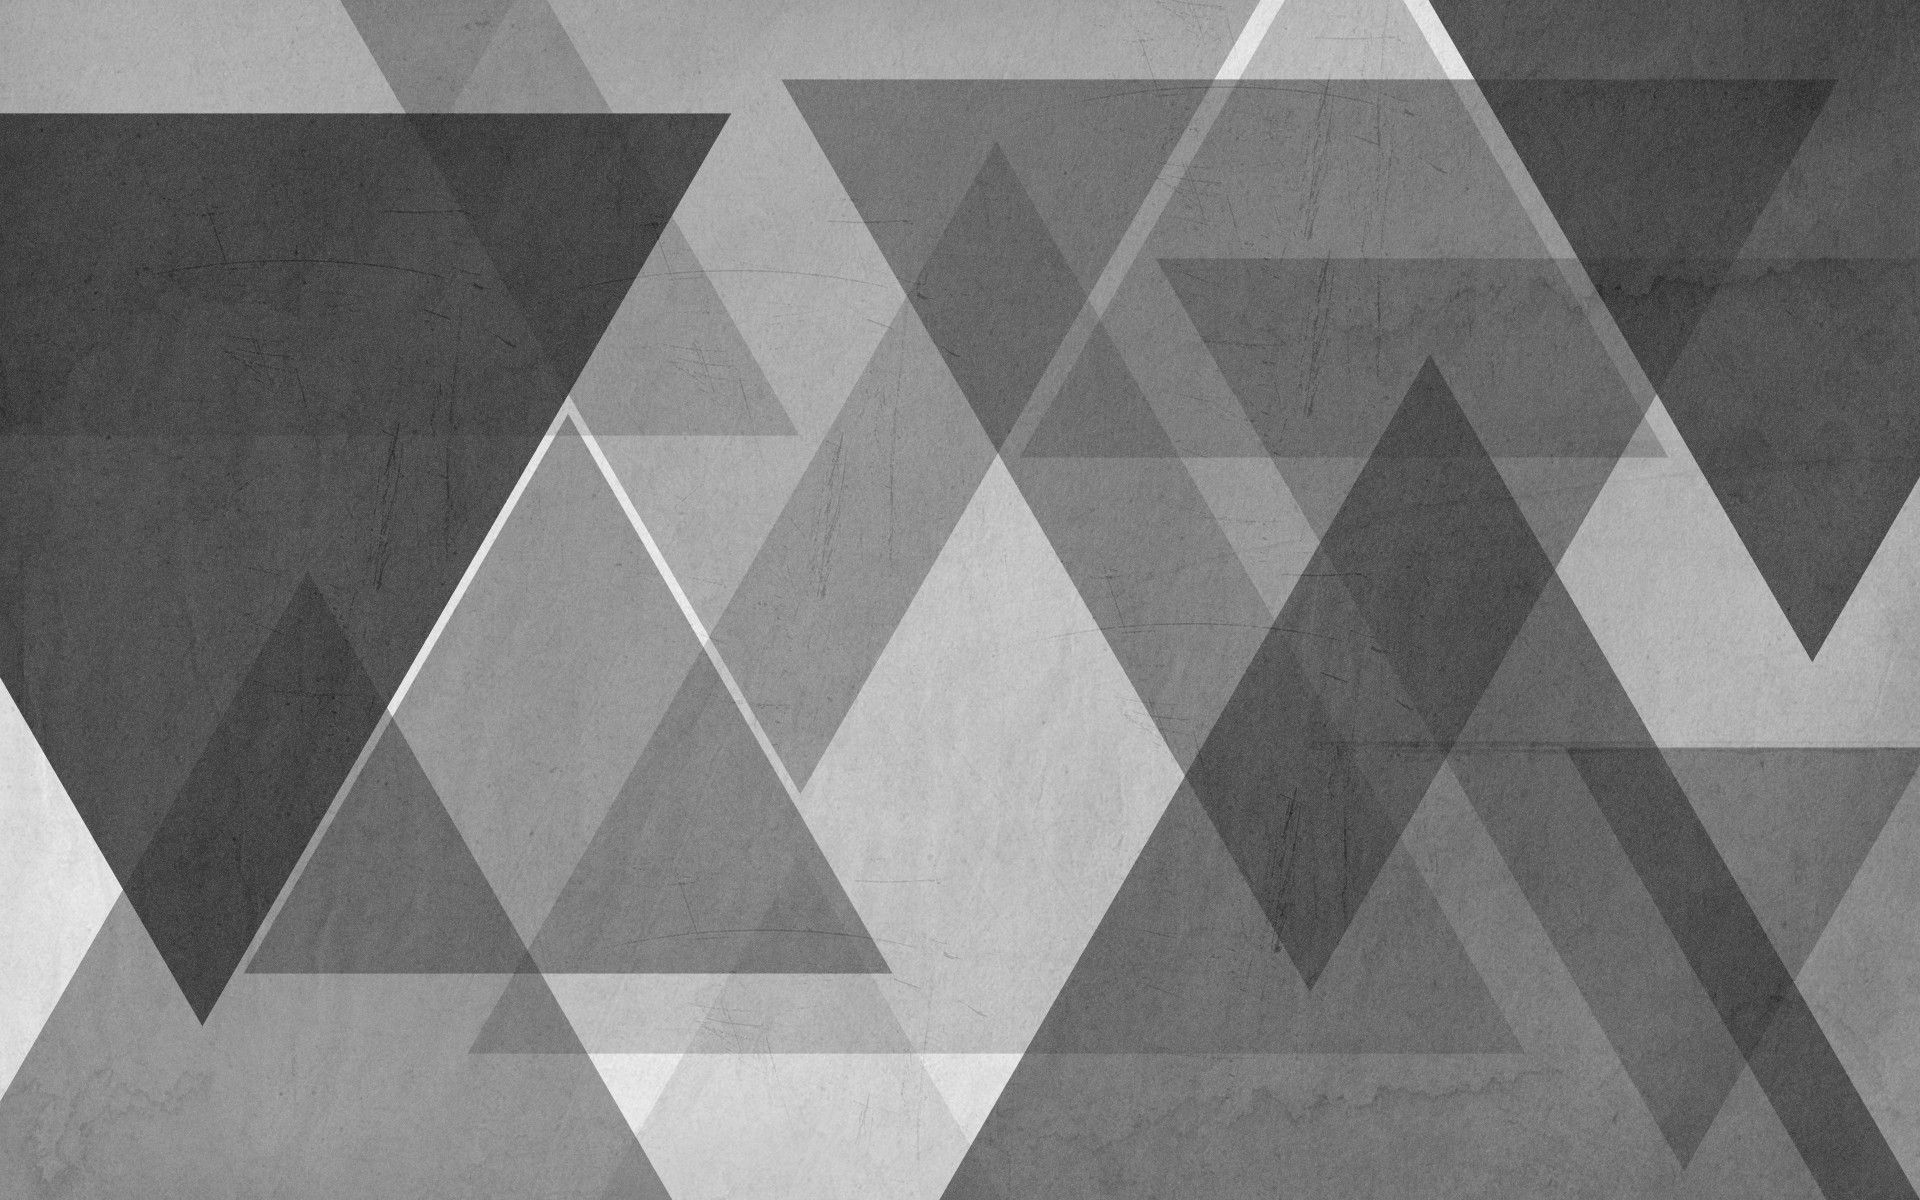 Grey Wallpaper Free Download Cool Images 4k Artwork Abstract Wallpaper Grey 1068542 Hd Wallpaper Backgrounds Download We present you our collection of desktop wallpaper theme: 4k artwork abstract wallpaper grey